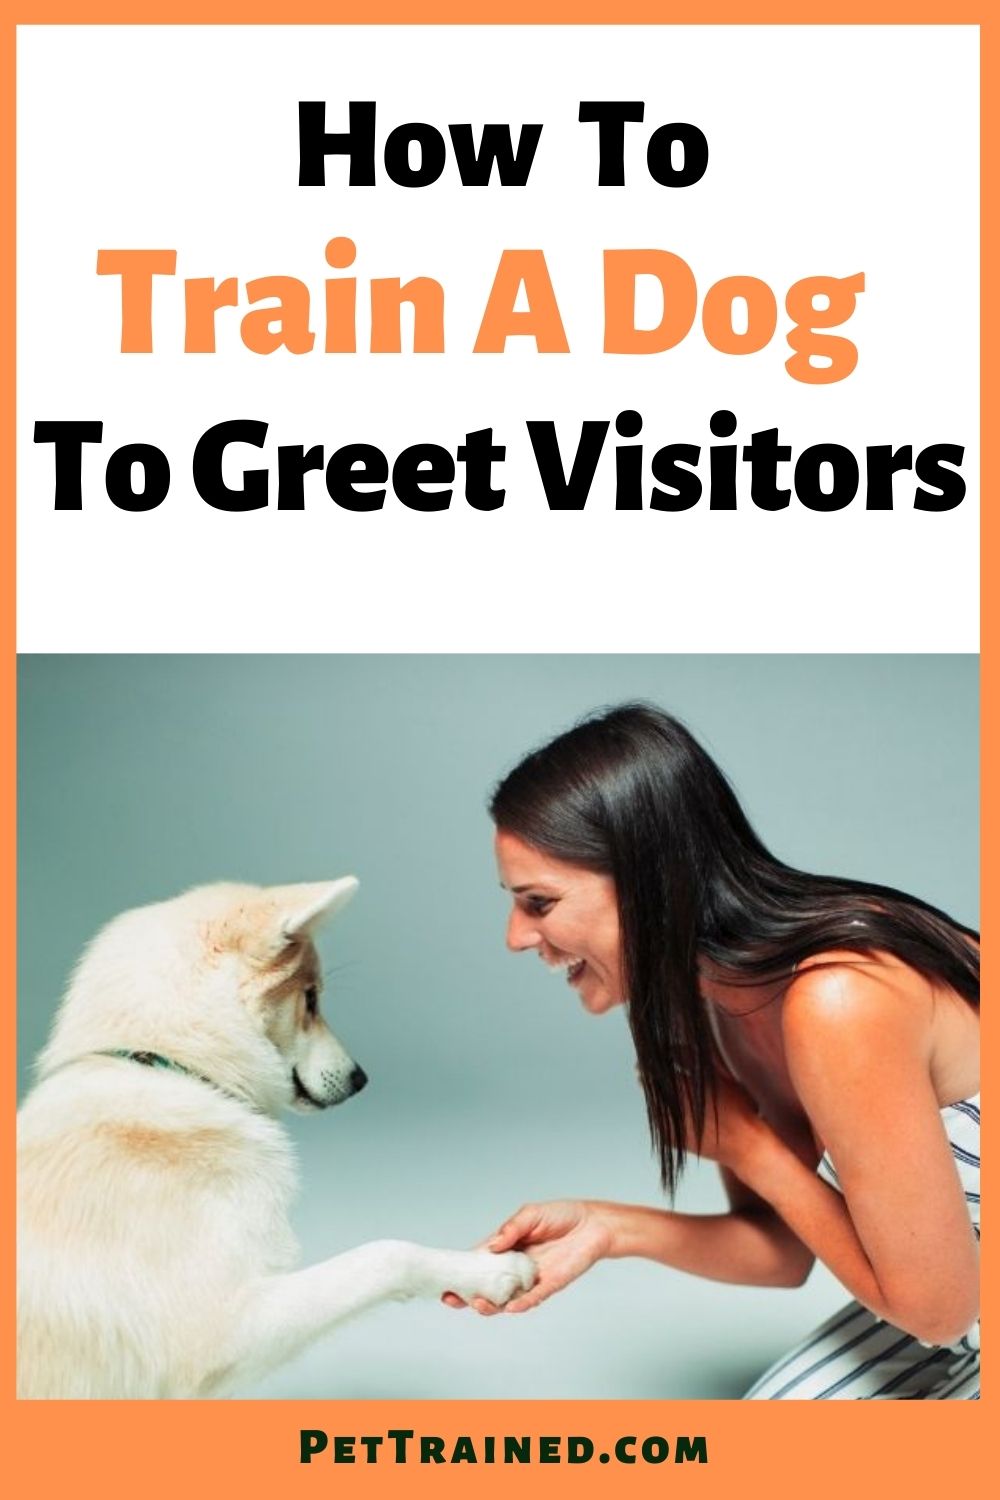 How to train a dog to greet visitors quickly